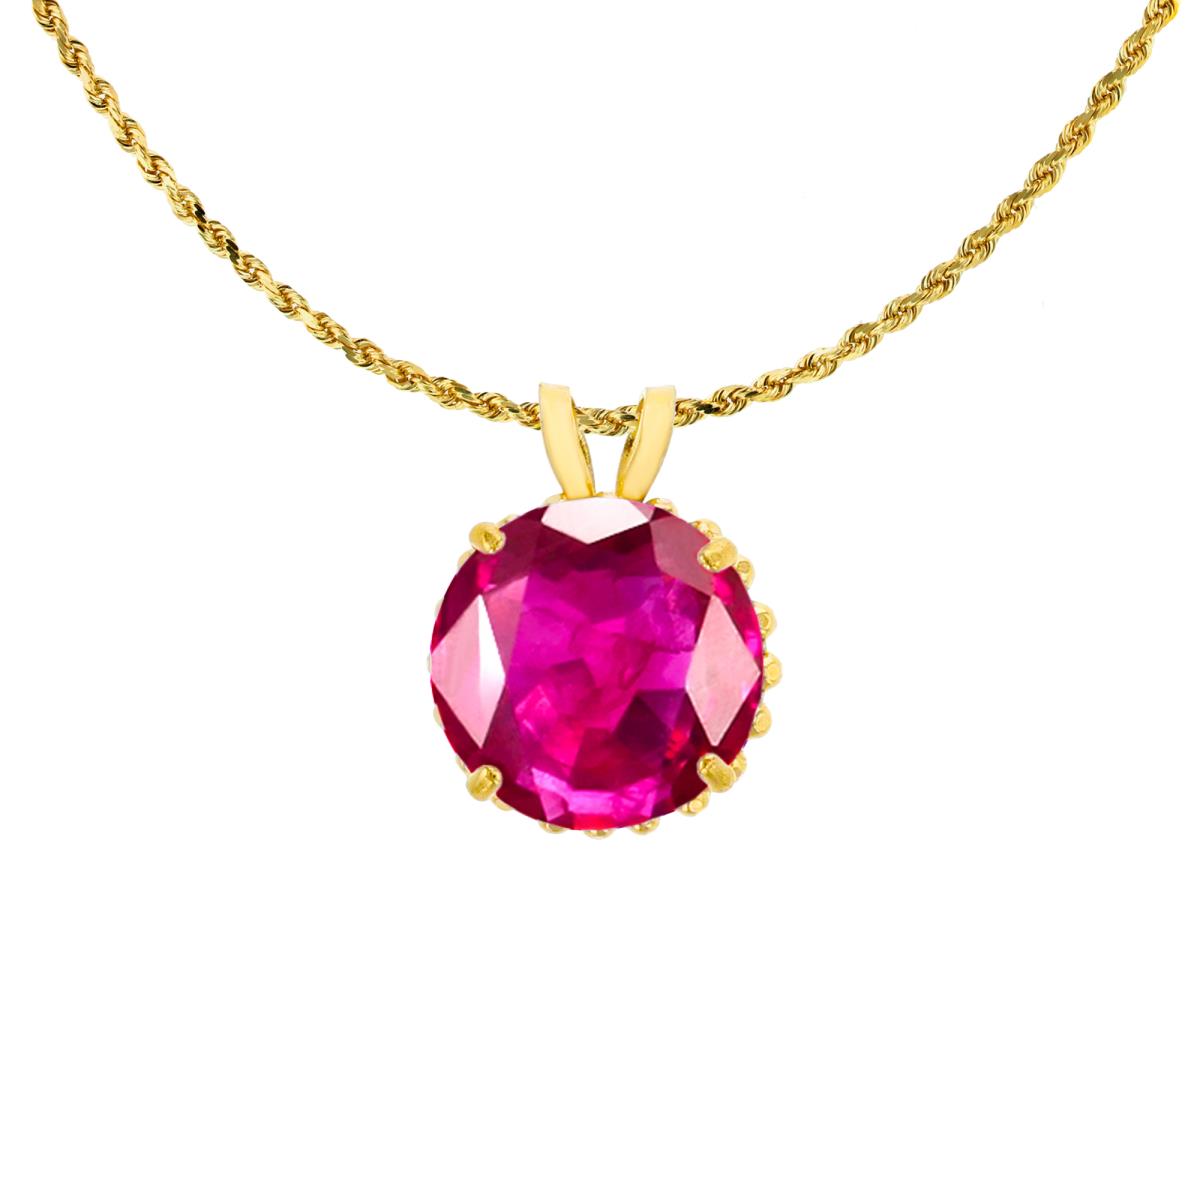 10K Yellow Gold 7mm Rd Cut Glass Filled Ruby with Bead Frame Rabbit Ear 18" Rope Chain Necklace